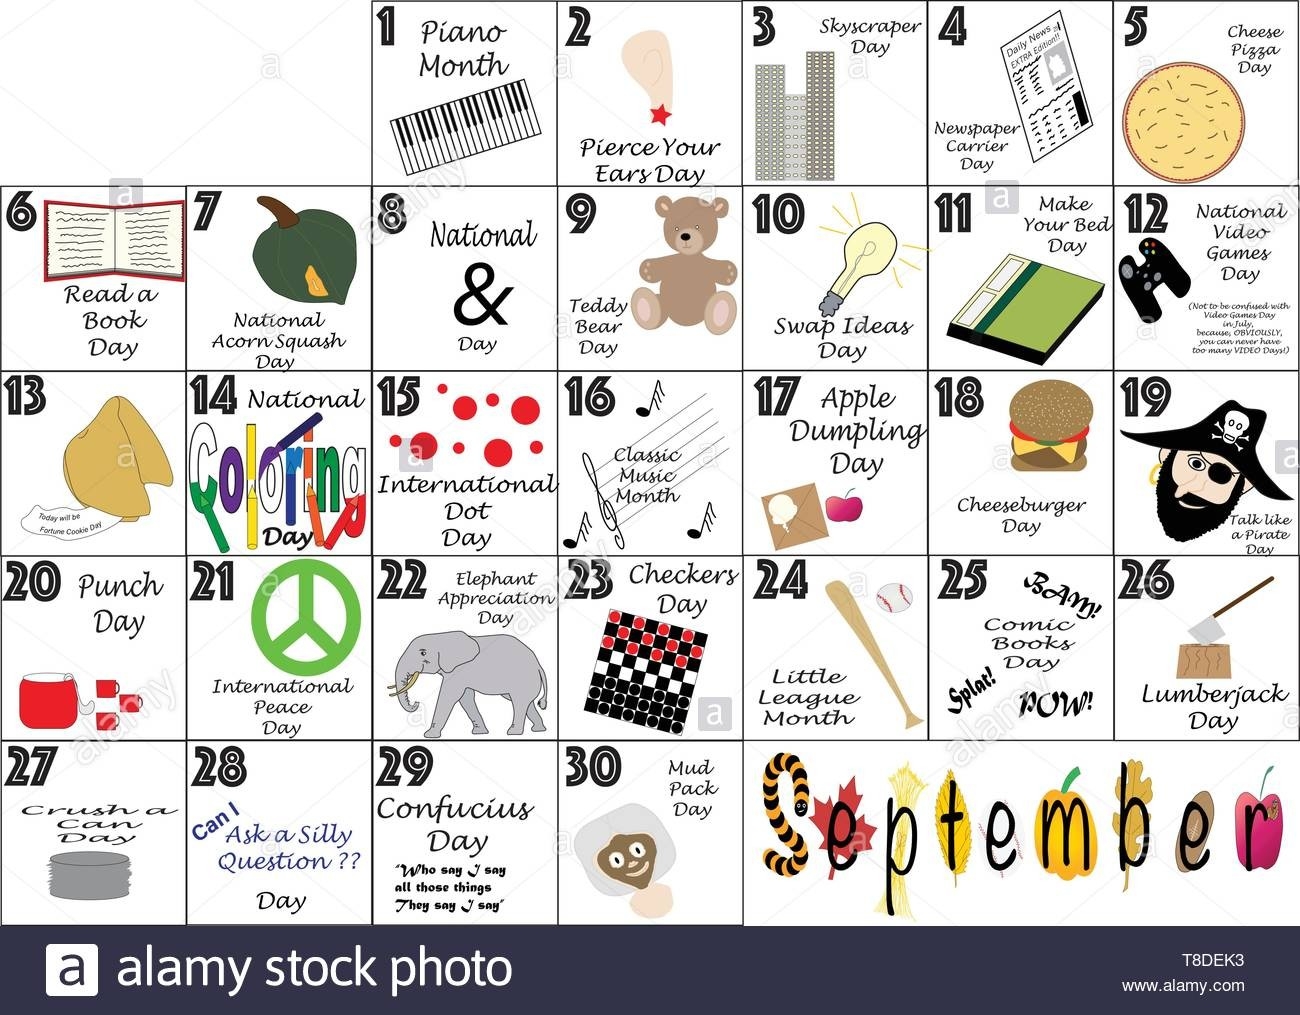 September 2020 Calendar Illustrated With Daily Quirky-September 2020 Daily Holidays Special And Wacky Days